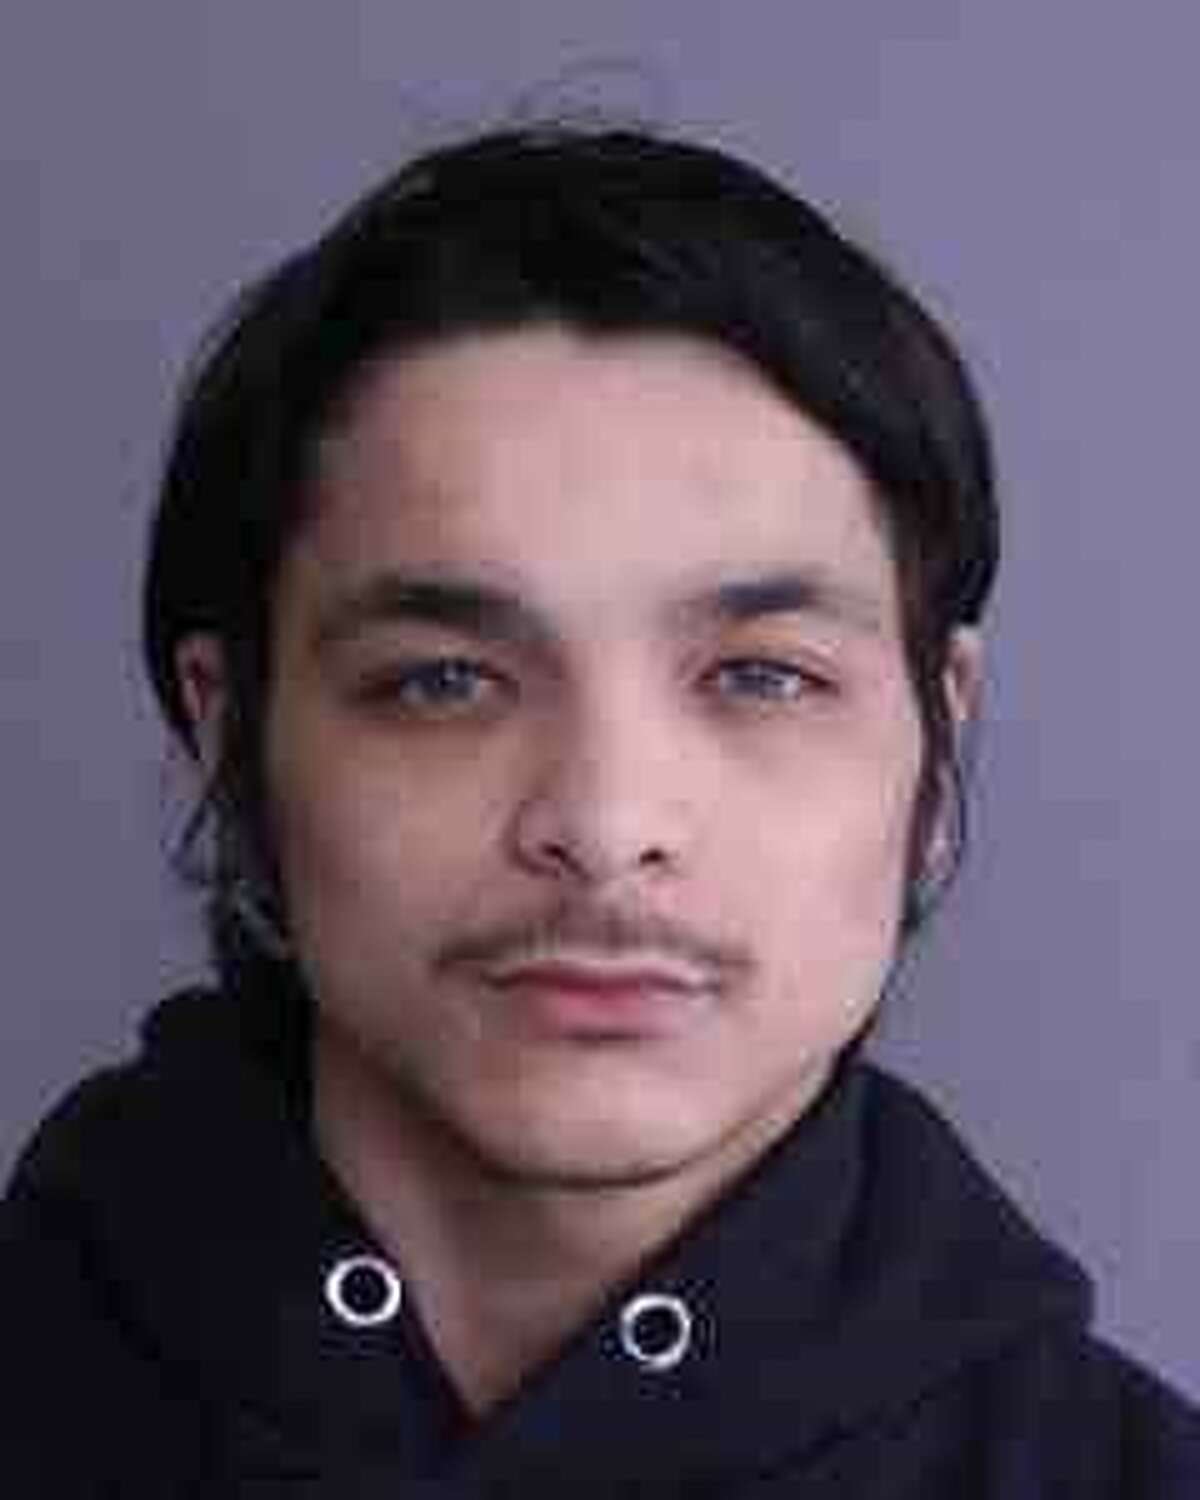 Branden Rivera, 19, of Albany, was indicted on charges of murder and felony robbery.